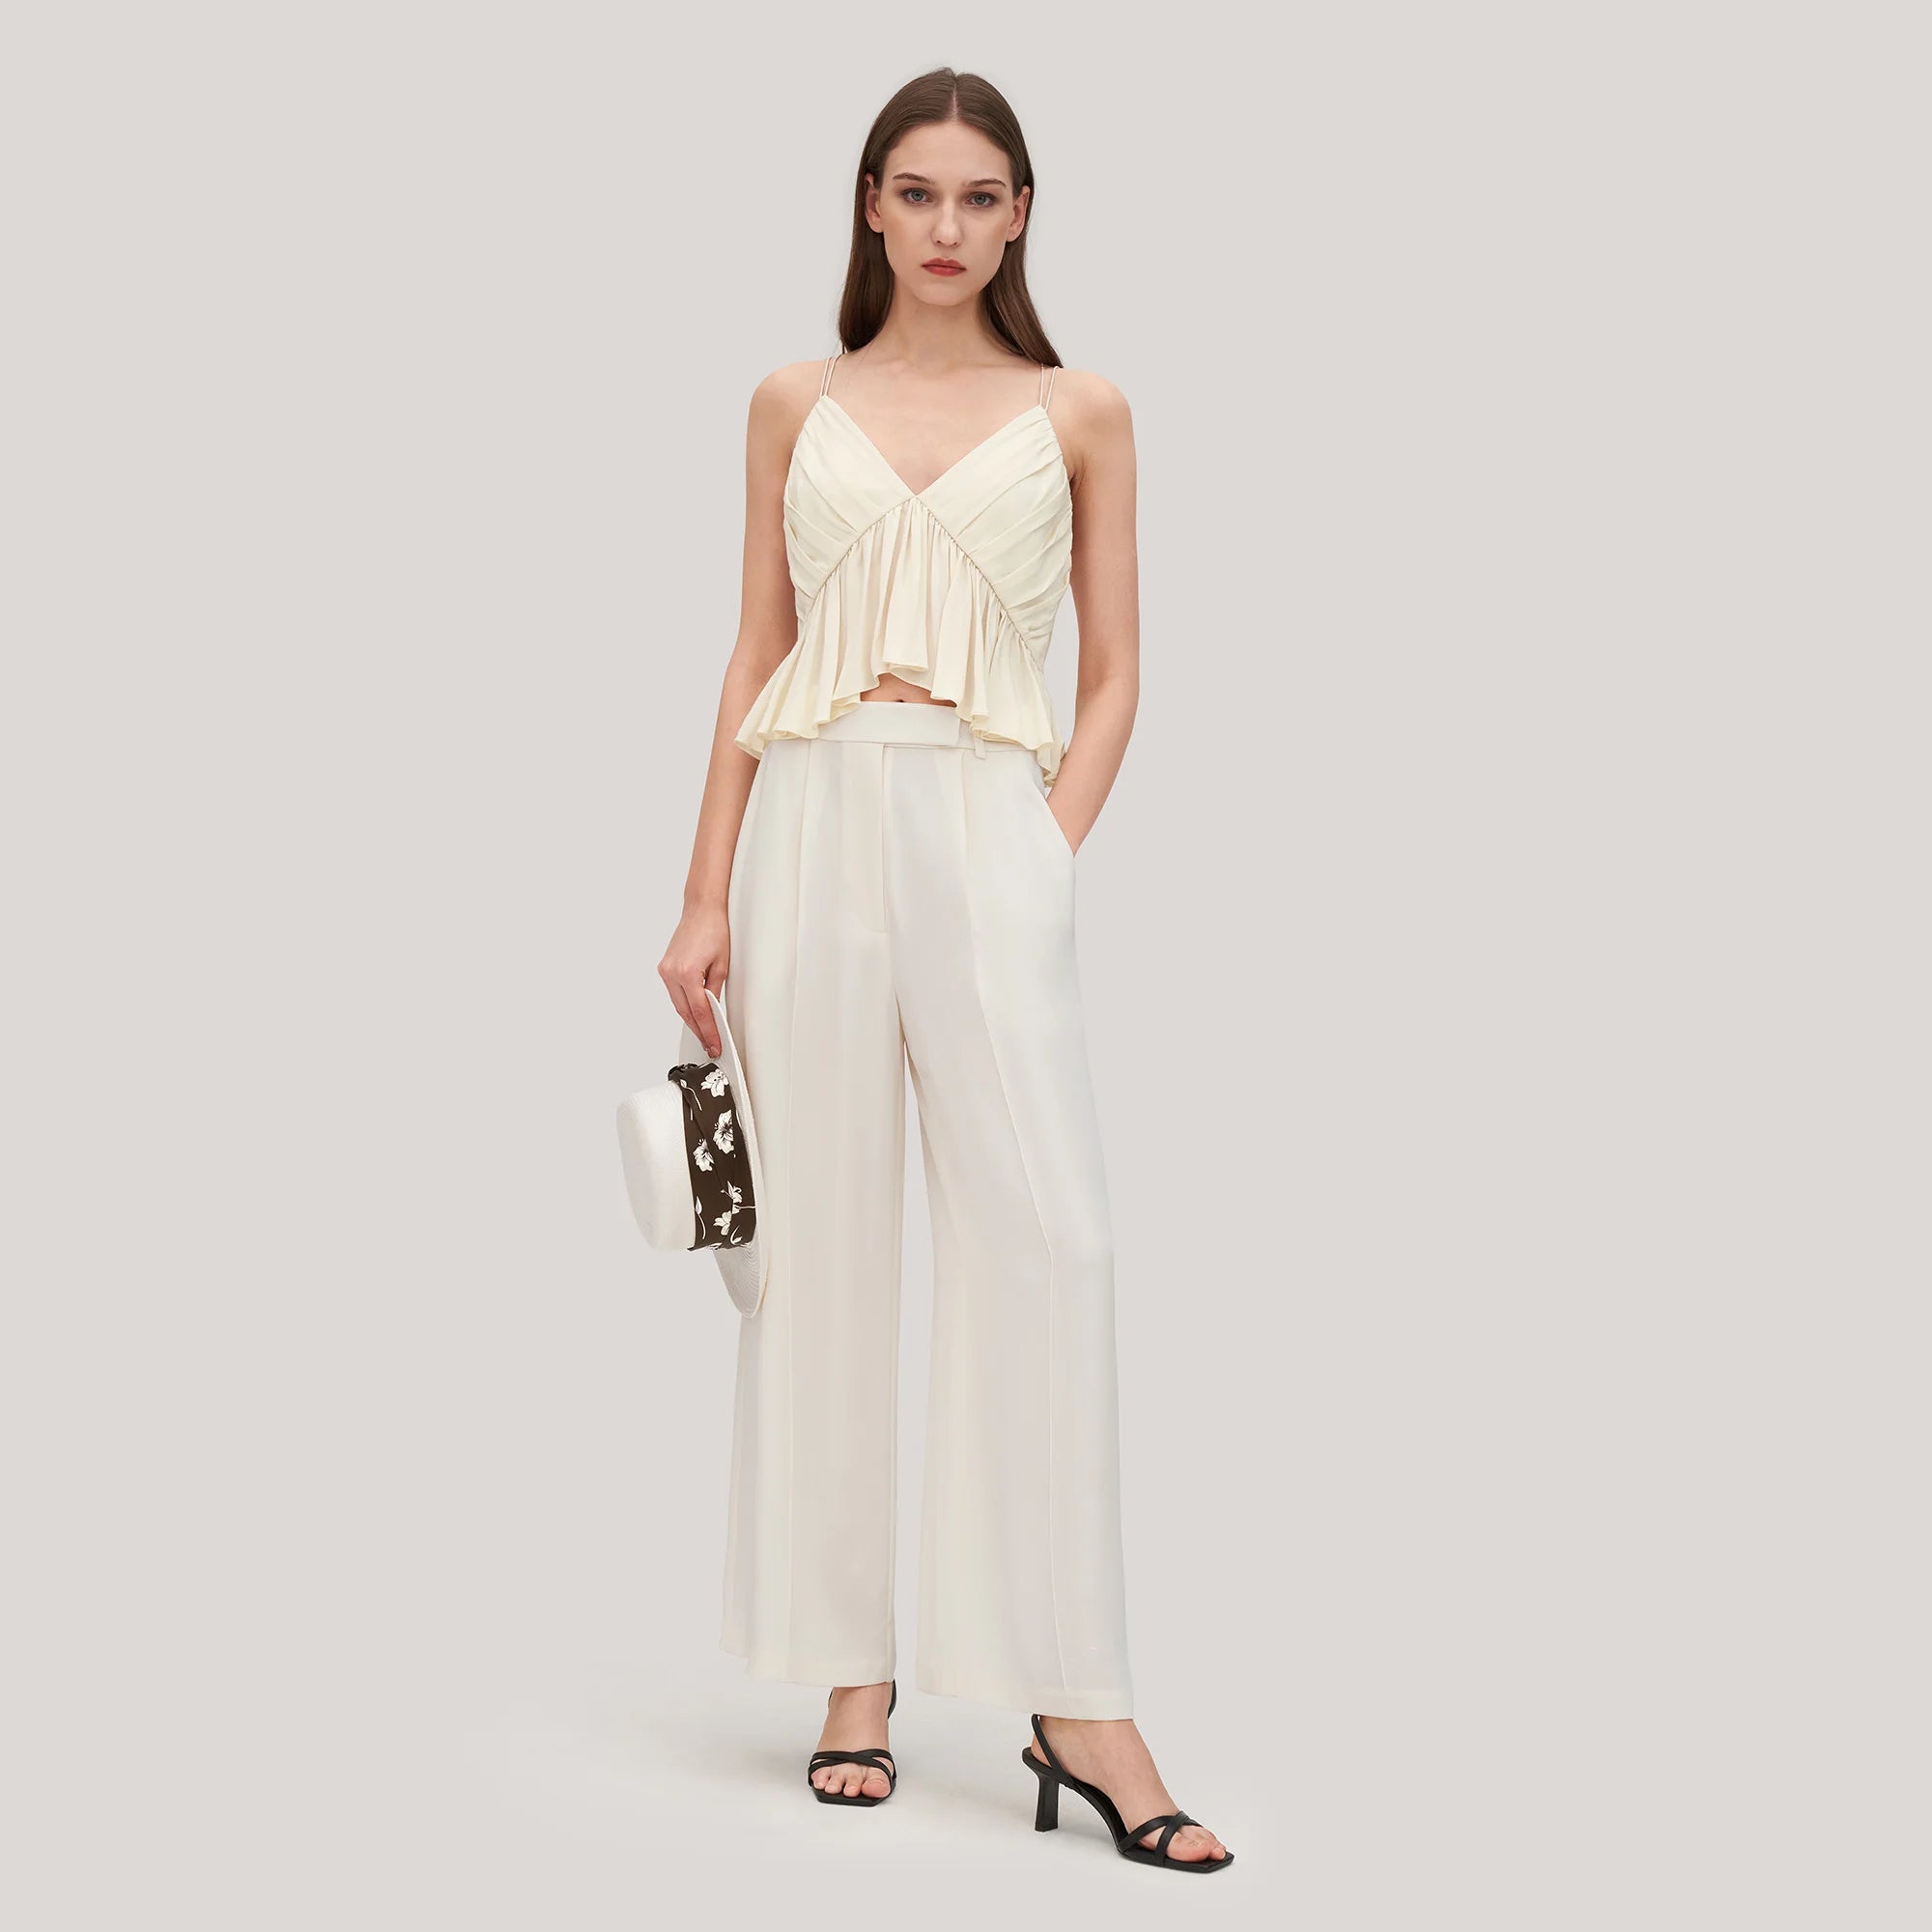 Crafted from Crepe Silk, the Tatiana Ensemble features a statement pair of contemporary pants, with a high waist and pocket design, creating a perfect silhouette of effortless elegance. The designers perfect balance of structure and fluidity makes this an exclusive piece for the fashionably elite.